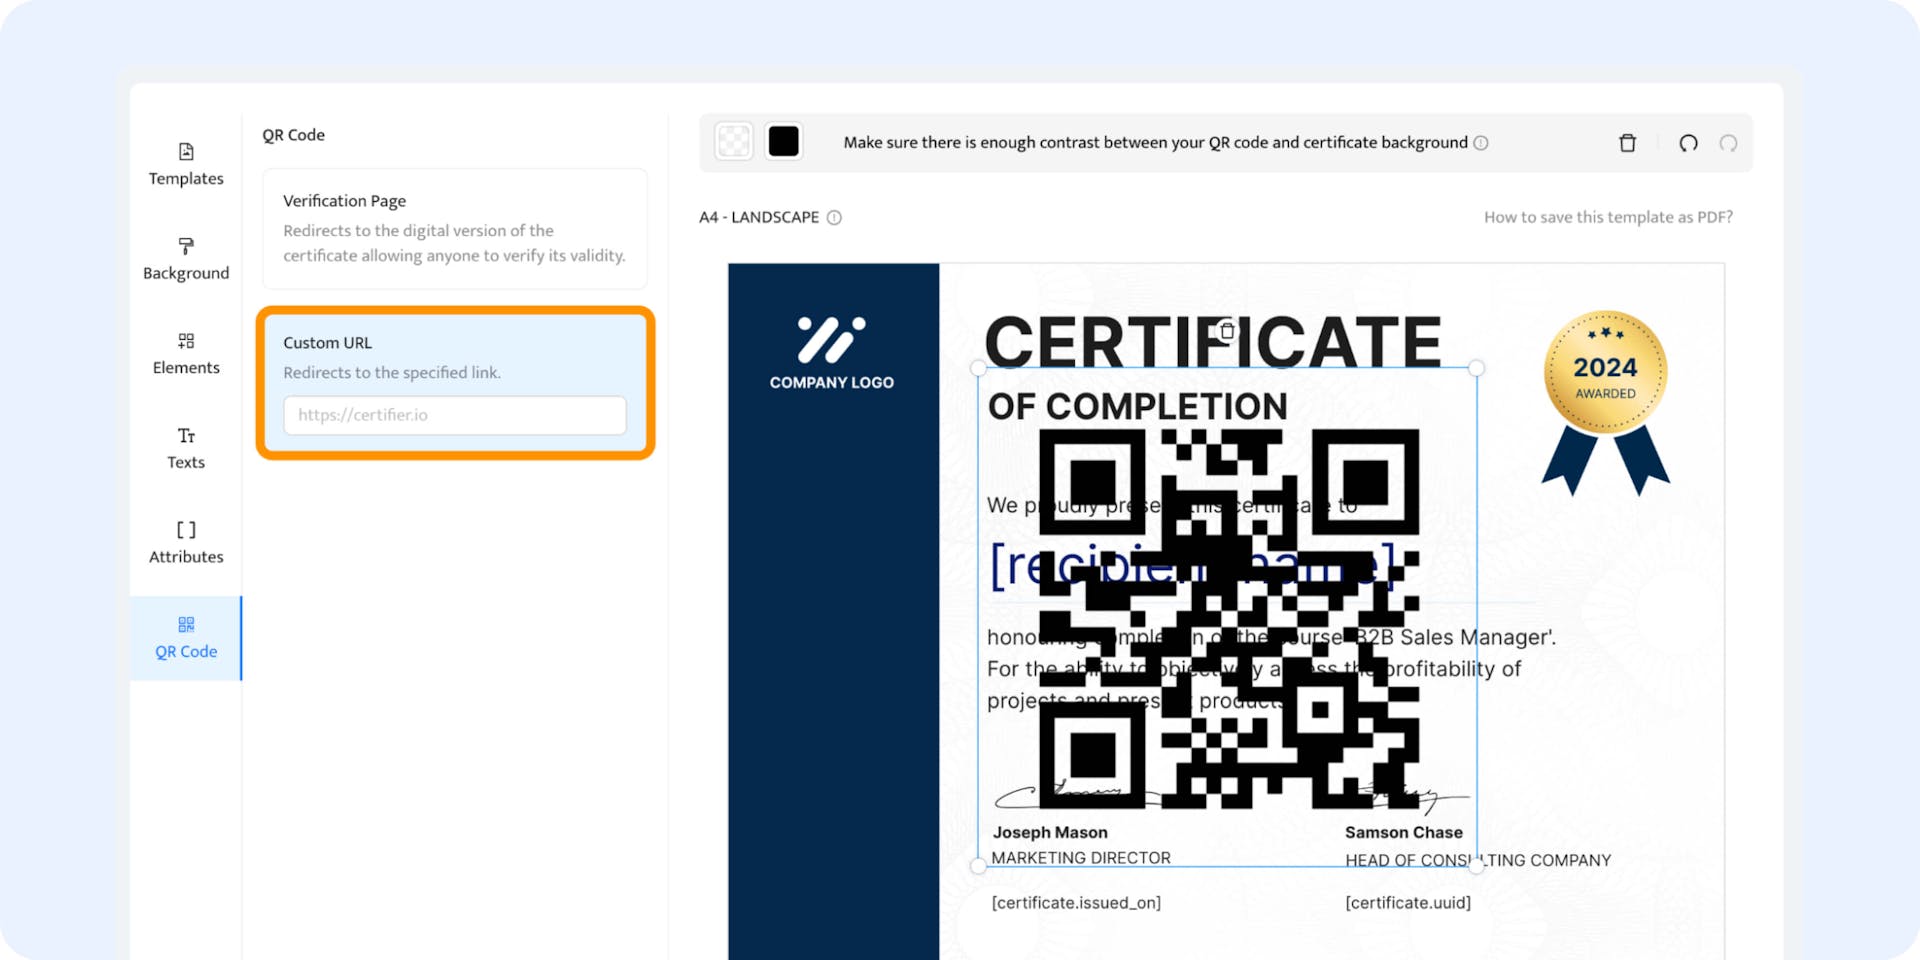 Adding a QR code to the certificate with a static custom URL.